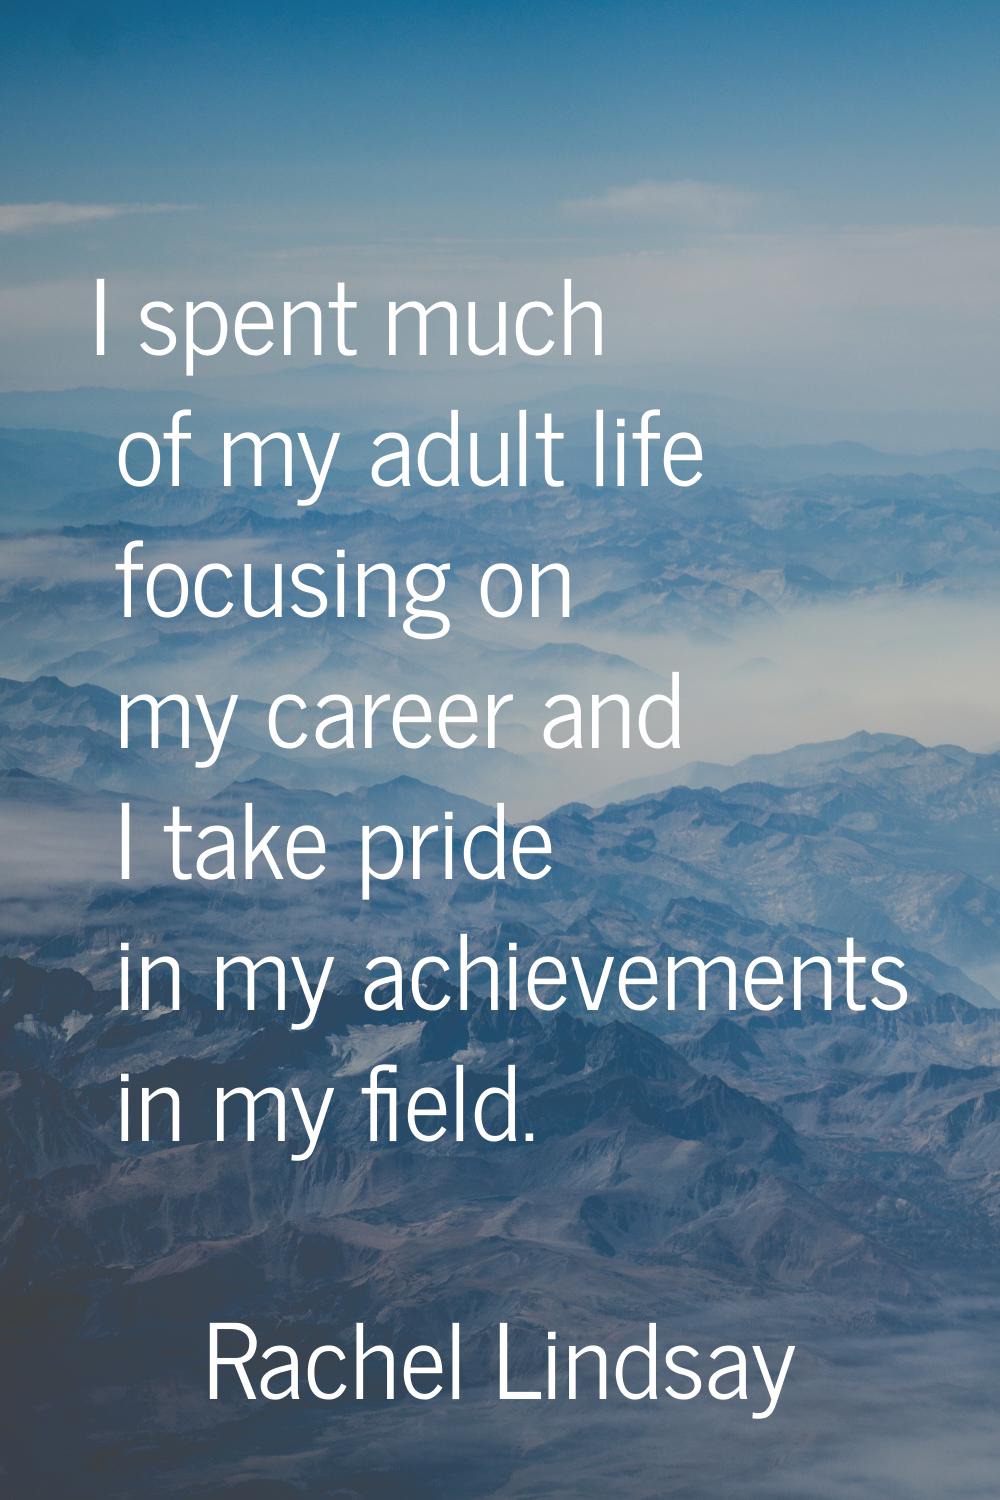 I spent much of my adult life focusing on my career and I take pride in my achievements in my field